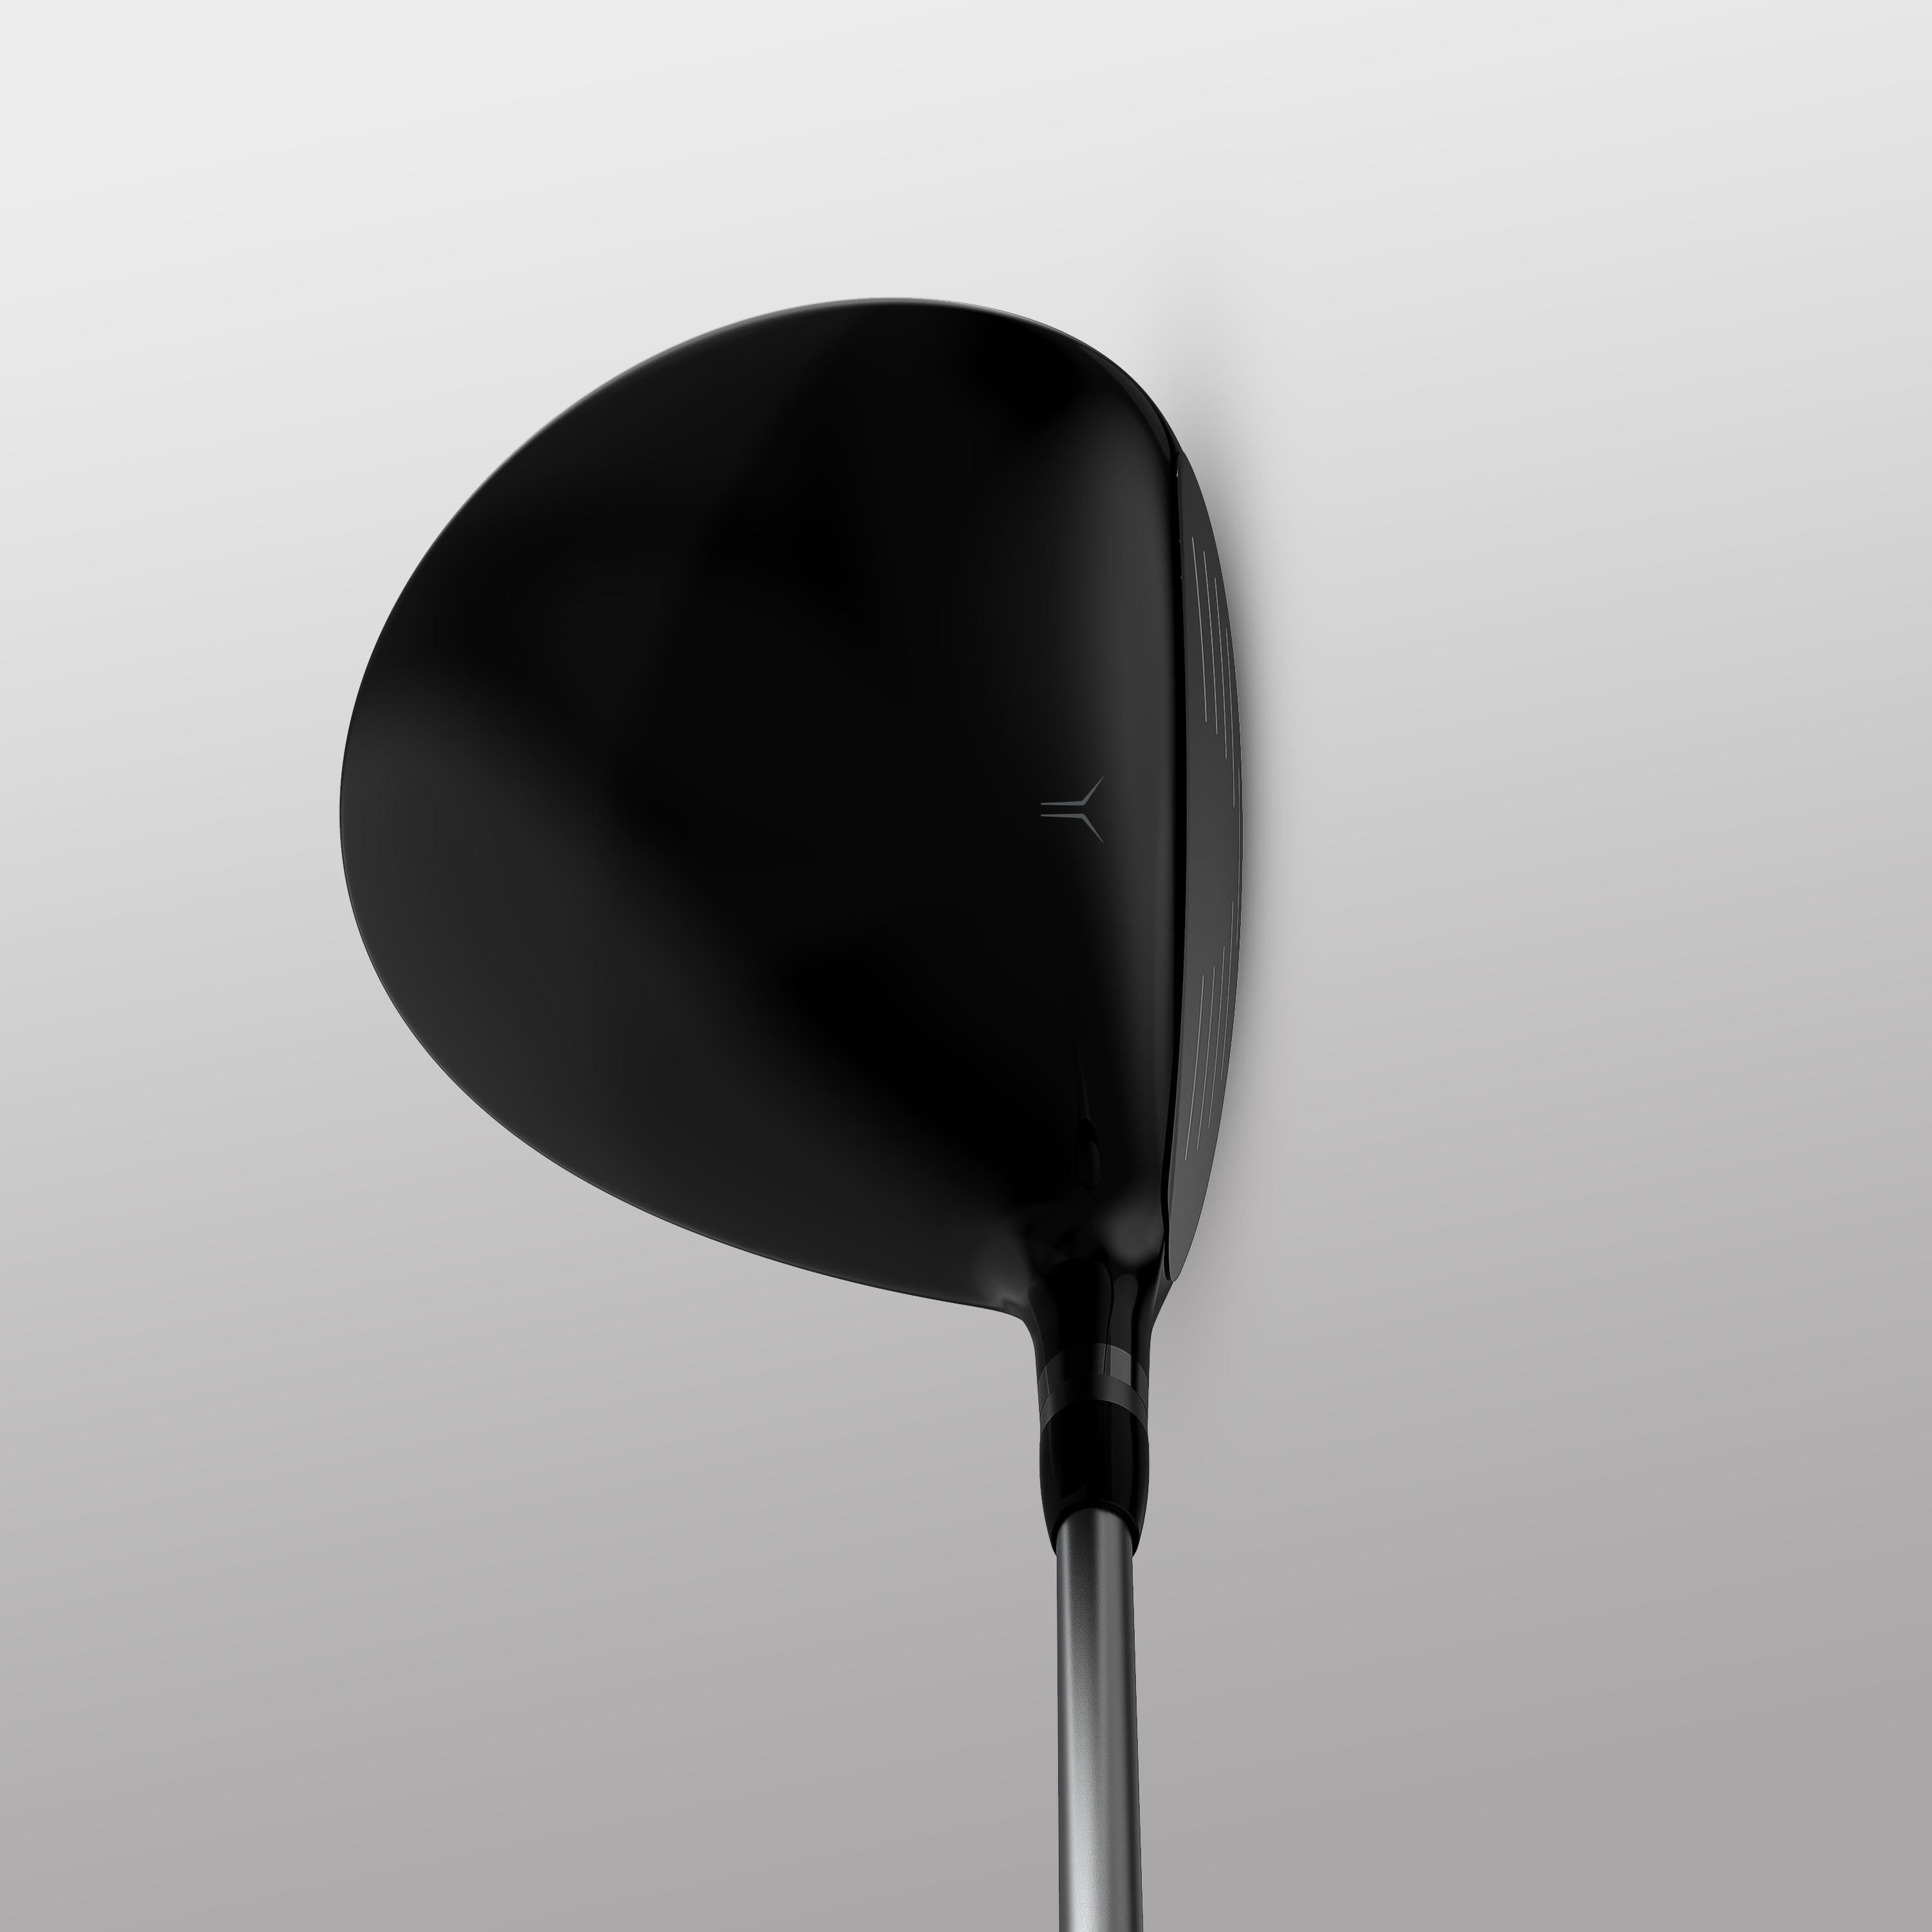 GOLF DRIVER 500 LEFT HANDED SIZE 1 & HIGH SPEED 2/8